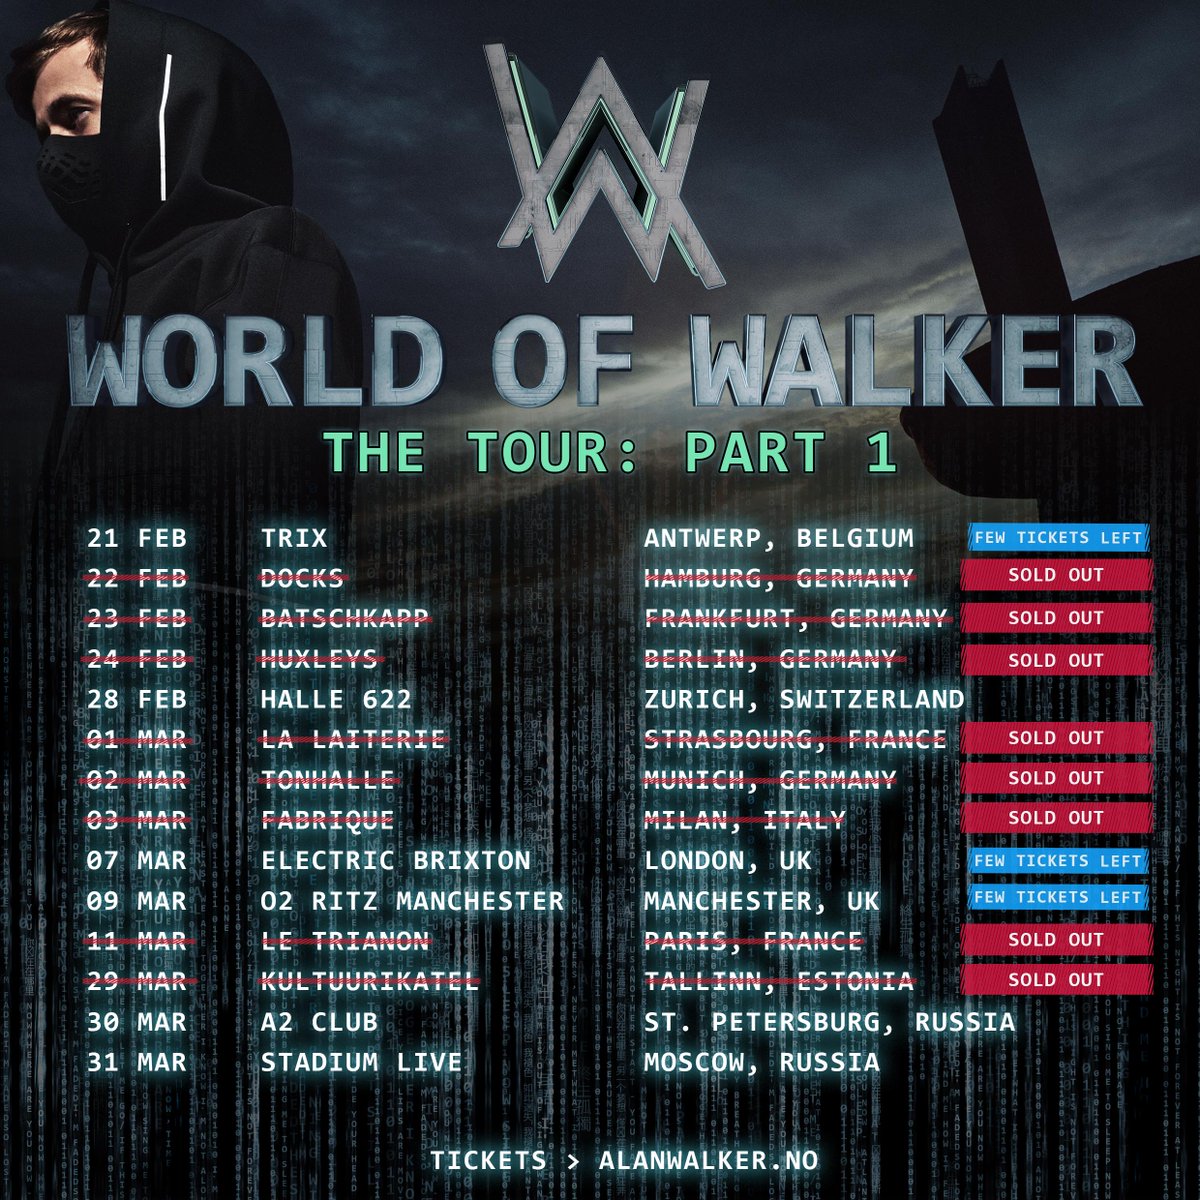 Alan Walker on Twitter: "I'm really excited to head out on tour again!🔥  Under a week until I head to Antwerp for the first stop. Most tickets sold  out but still a